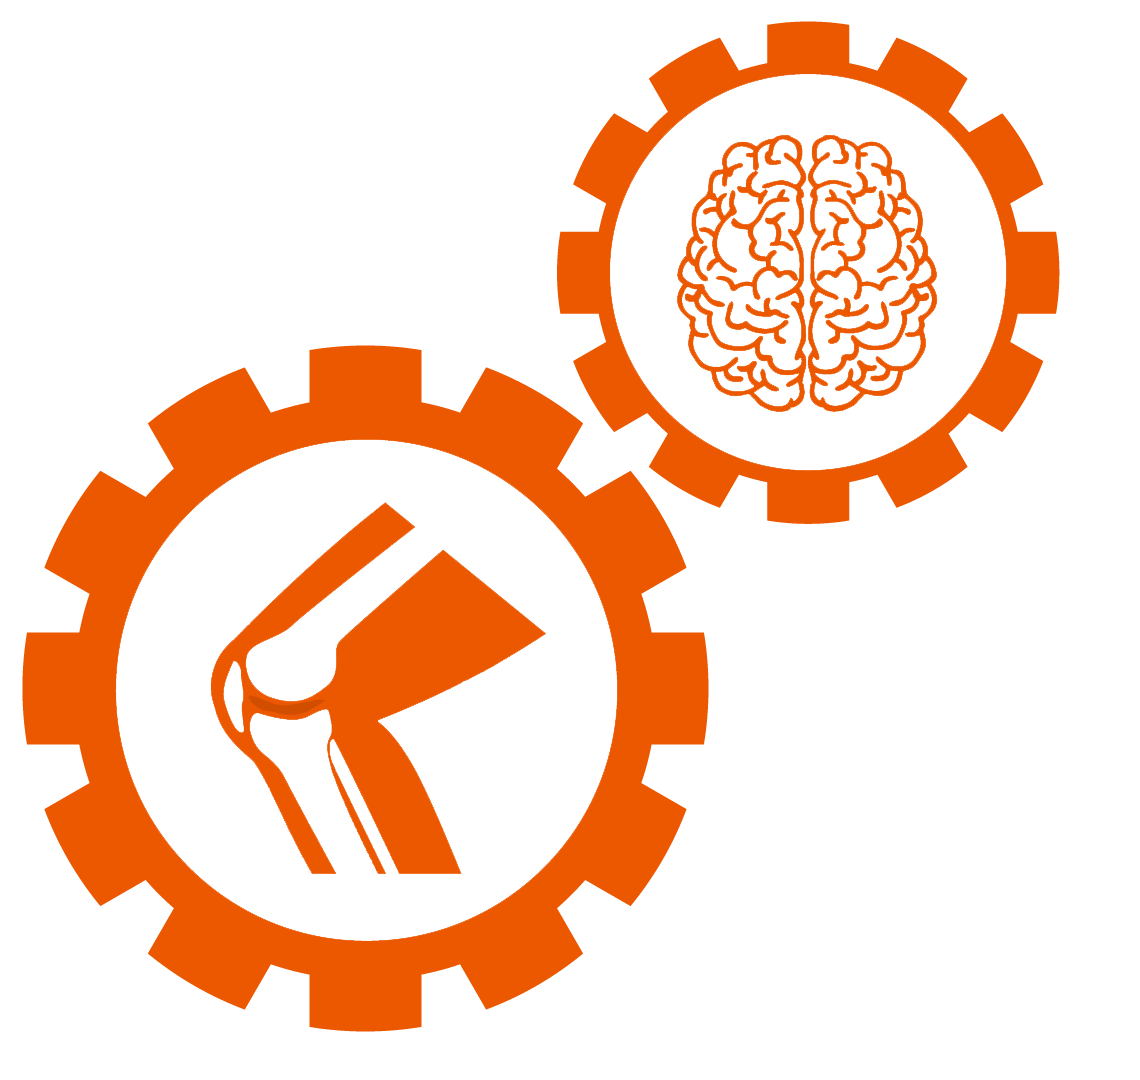 An icon of two gears working together. In one gear there is an image of a knee joint, while the other gear has an image of a brain.